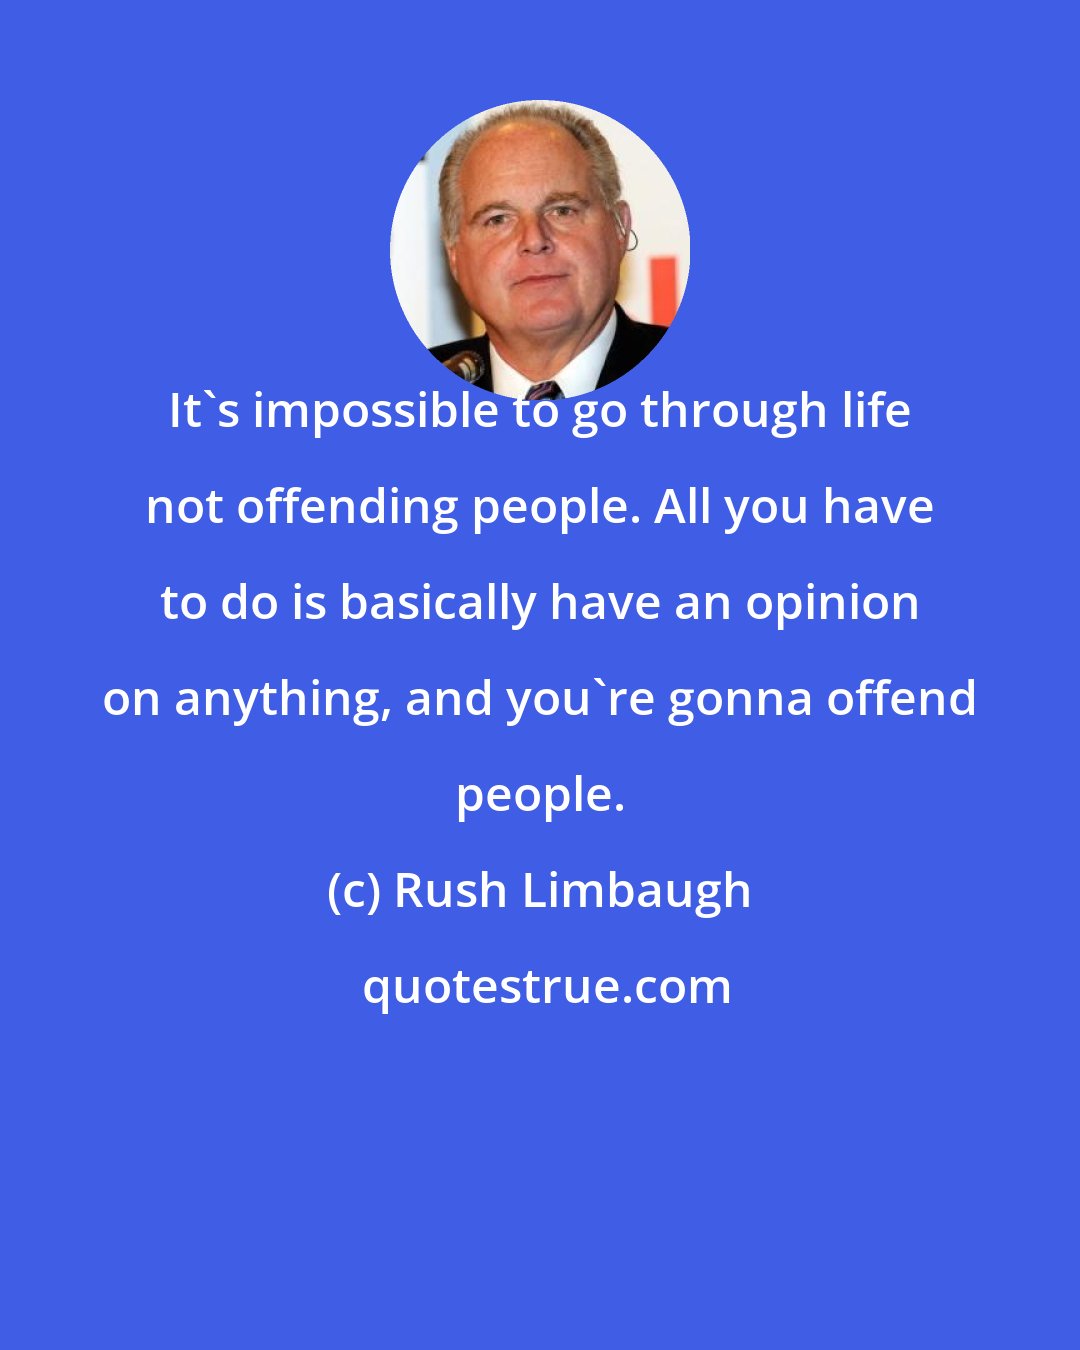 Rush Limbaugh: It's impossible to go through life not offending people. All you have to do is basically have an opinion on anything, and you're gonna offend people.